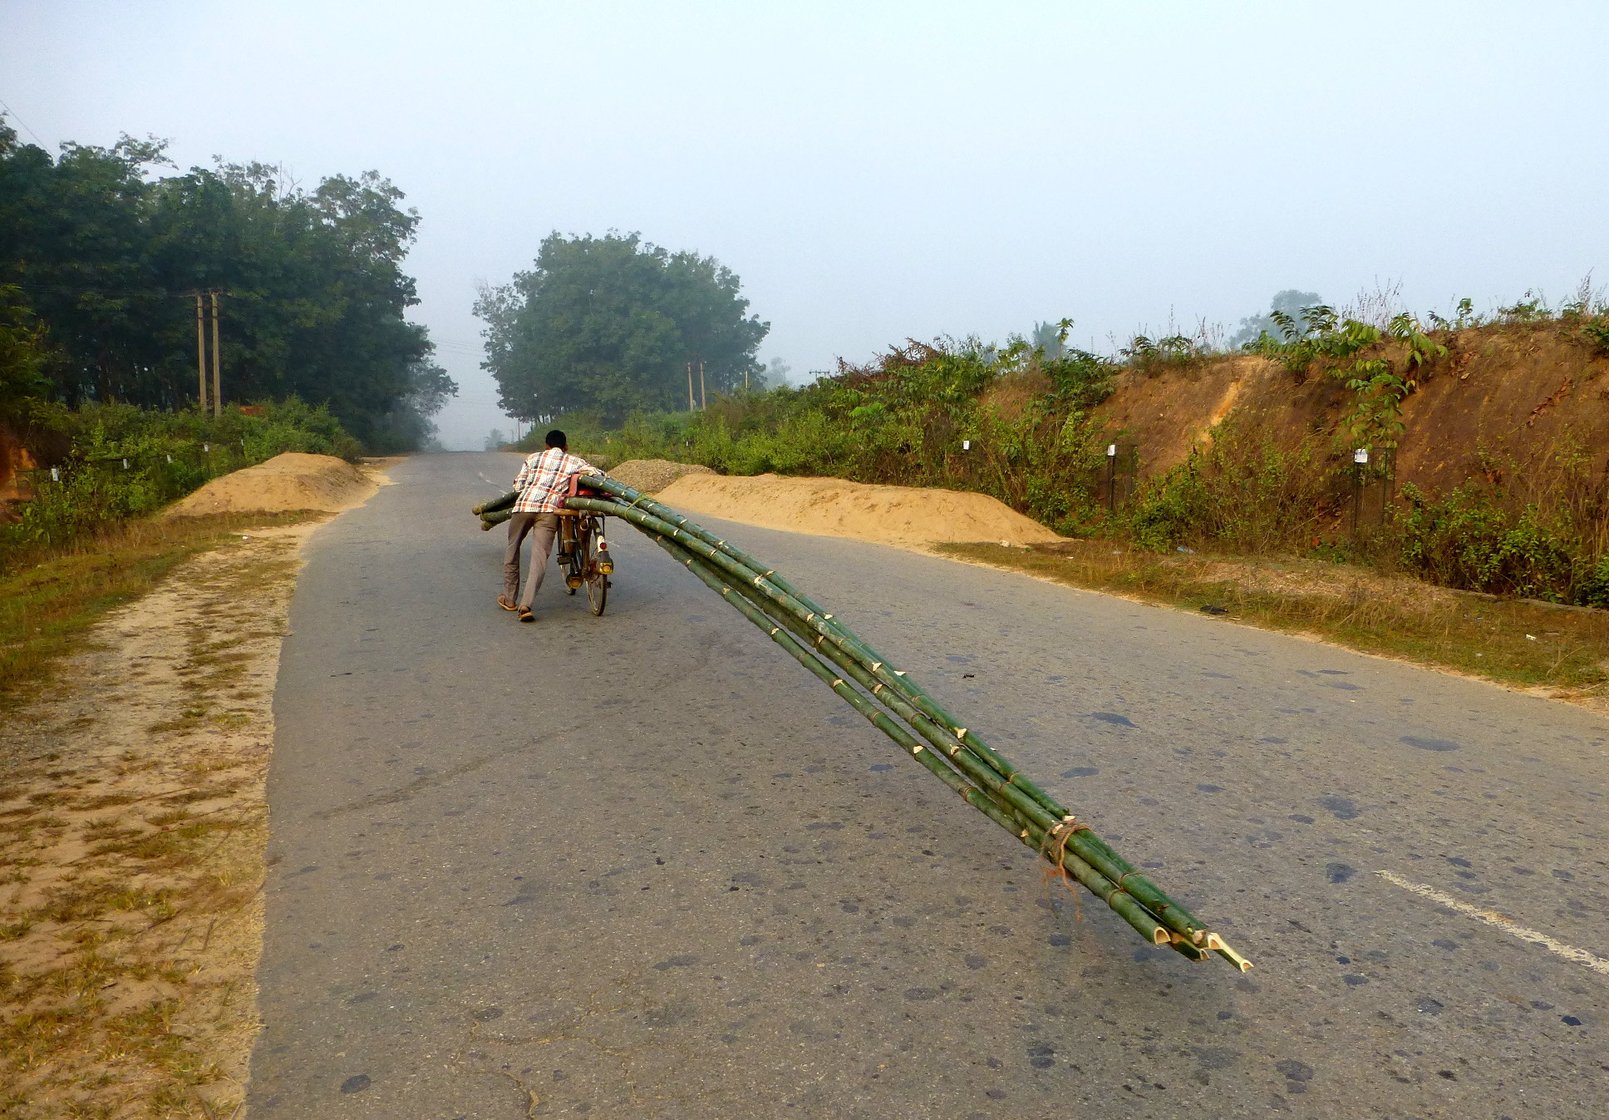 Biswas pushes off in the opposite direction, his bicycle's 40-feet tail wagging gently behind him